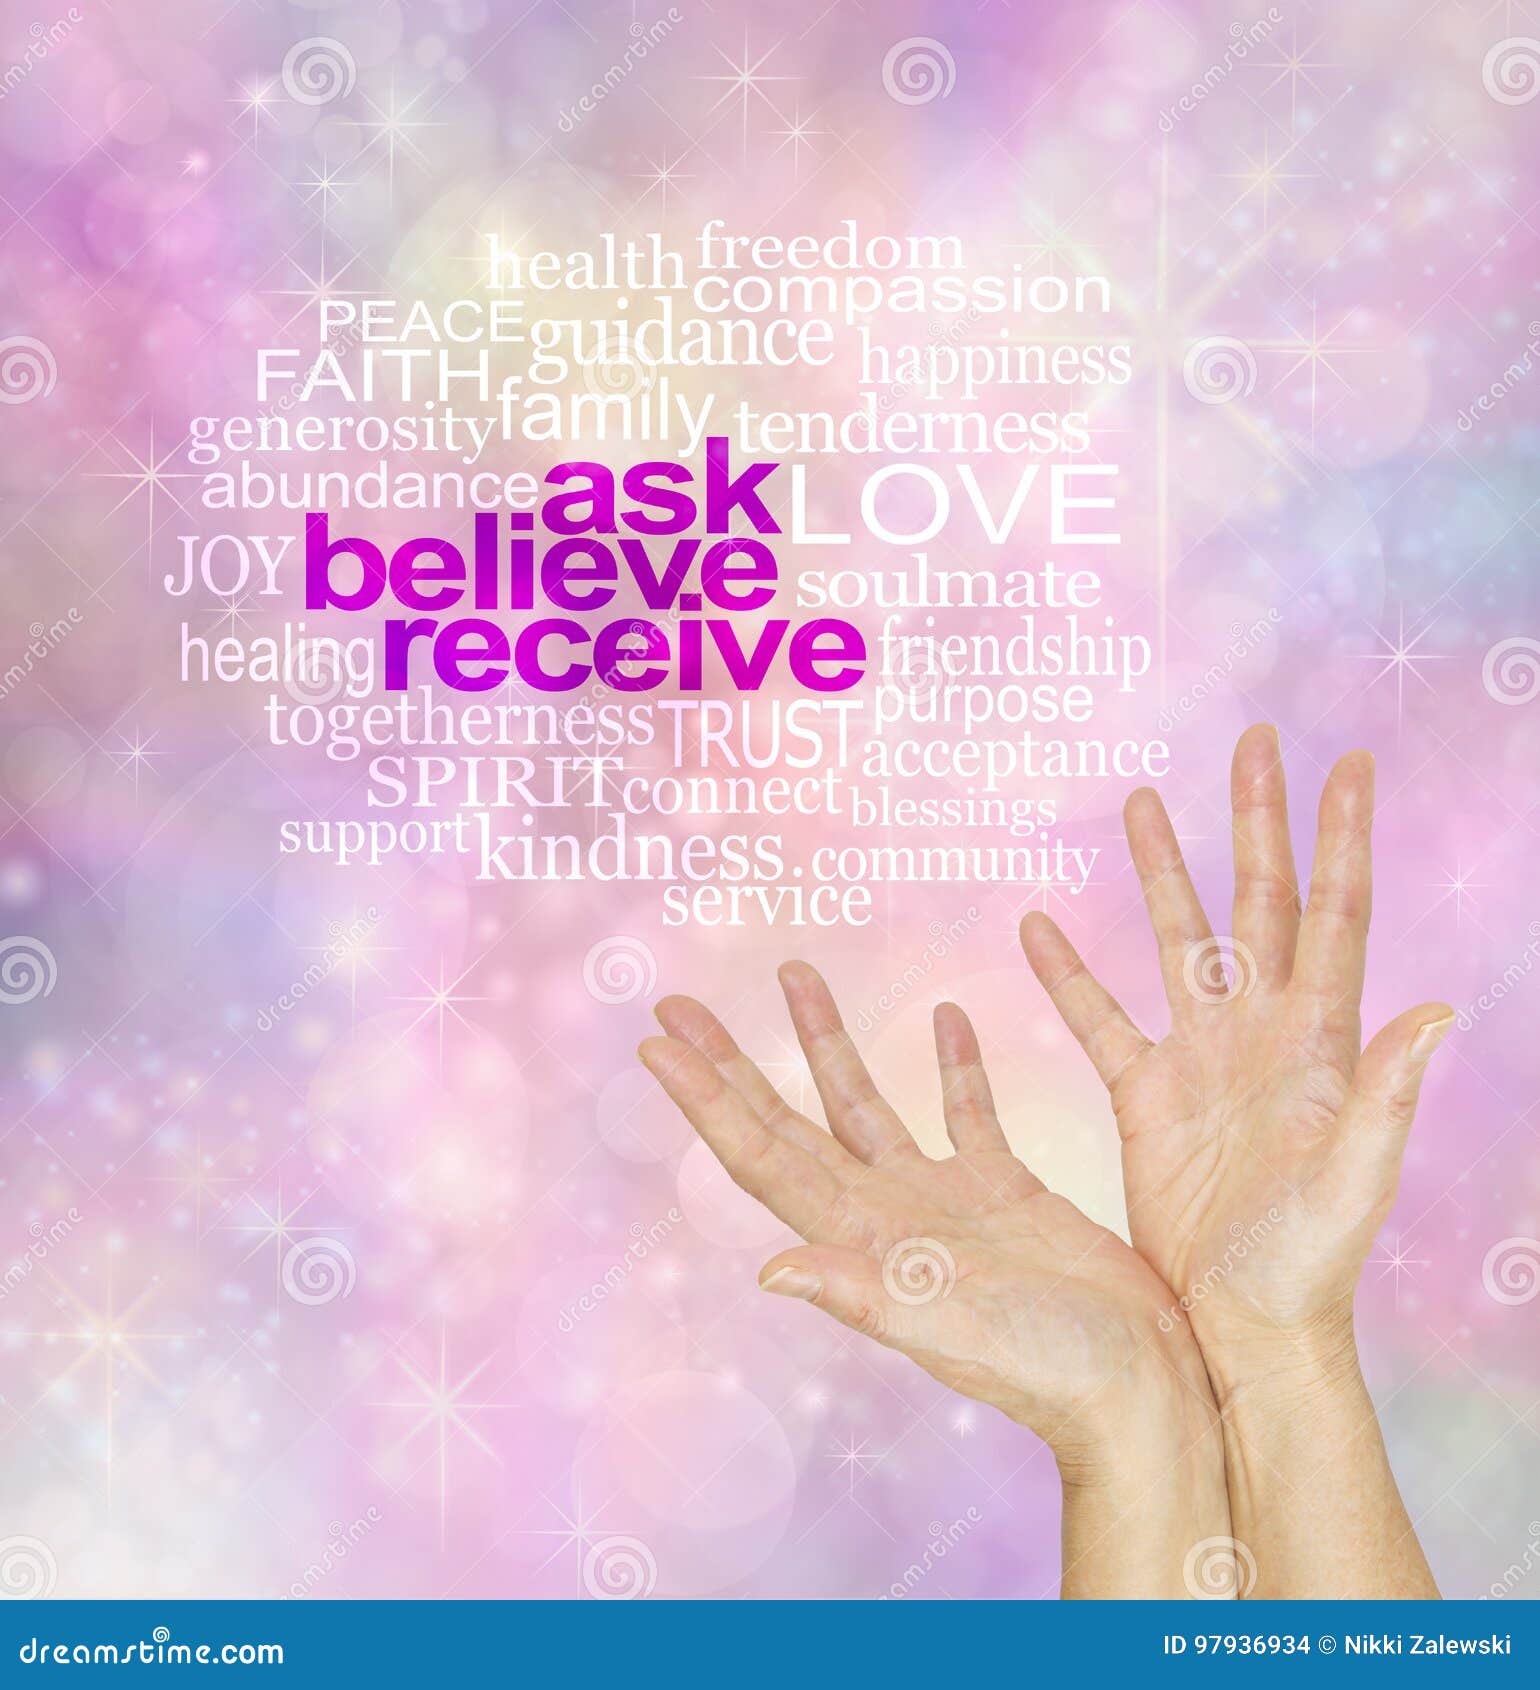 ask believe receive - the law of attraction word cloud